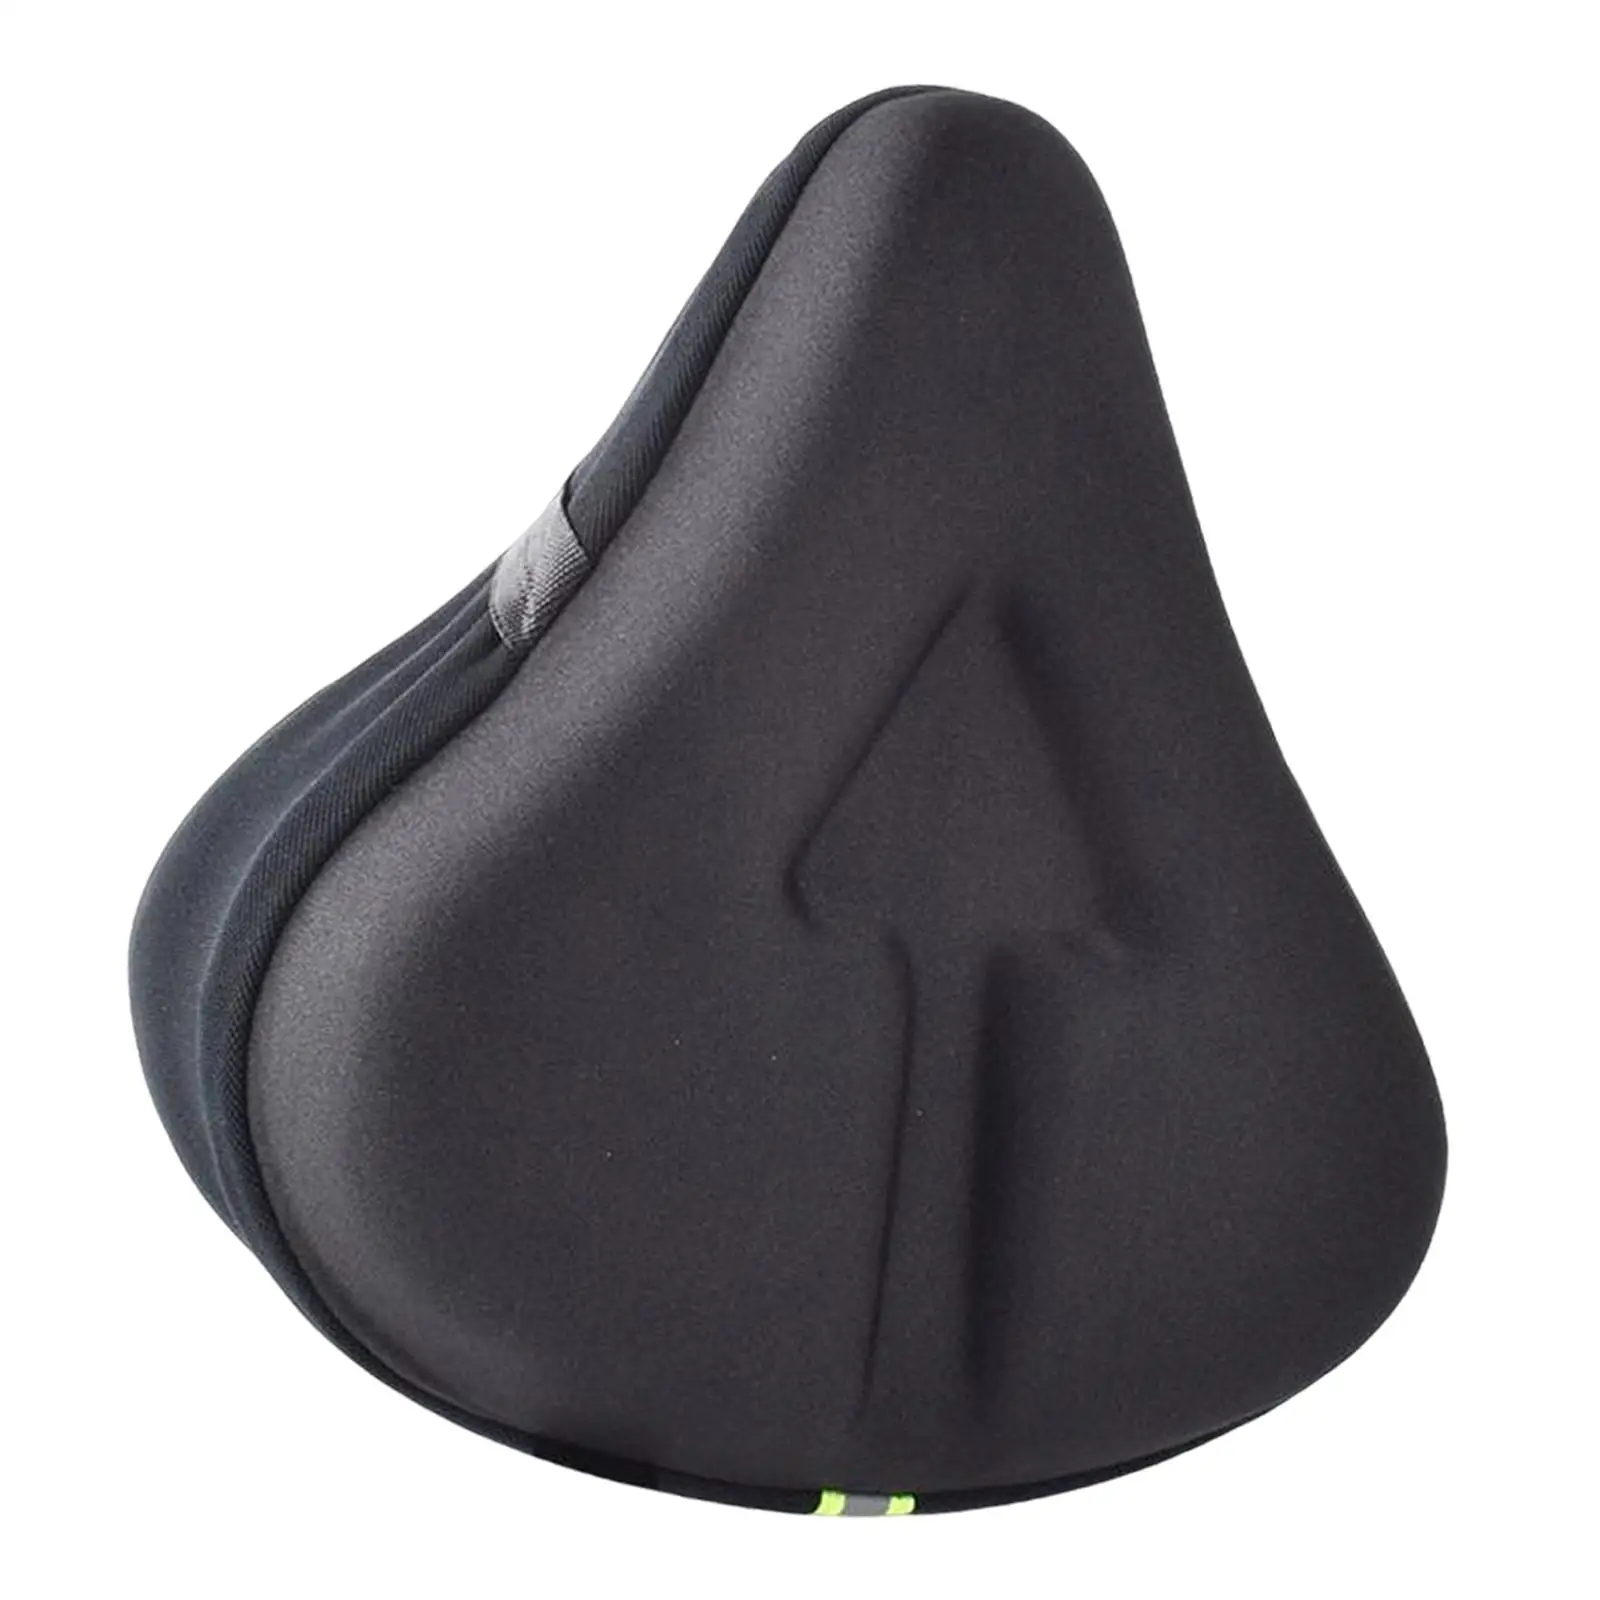 Bike Seat ,  Padded Seat Covers on for Saddles, Comfortable  Bike Replacement